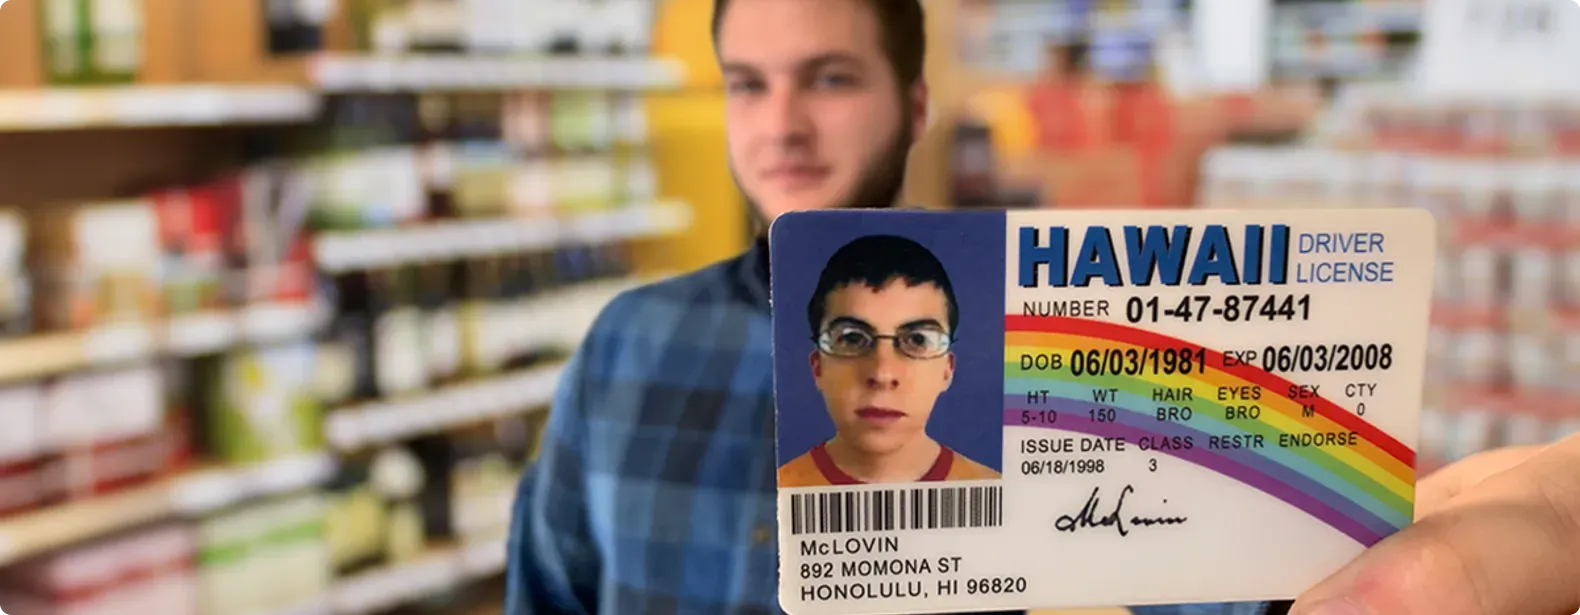 how to fake ids